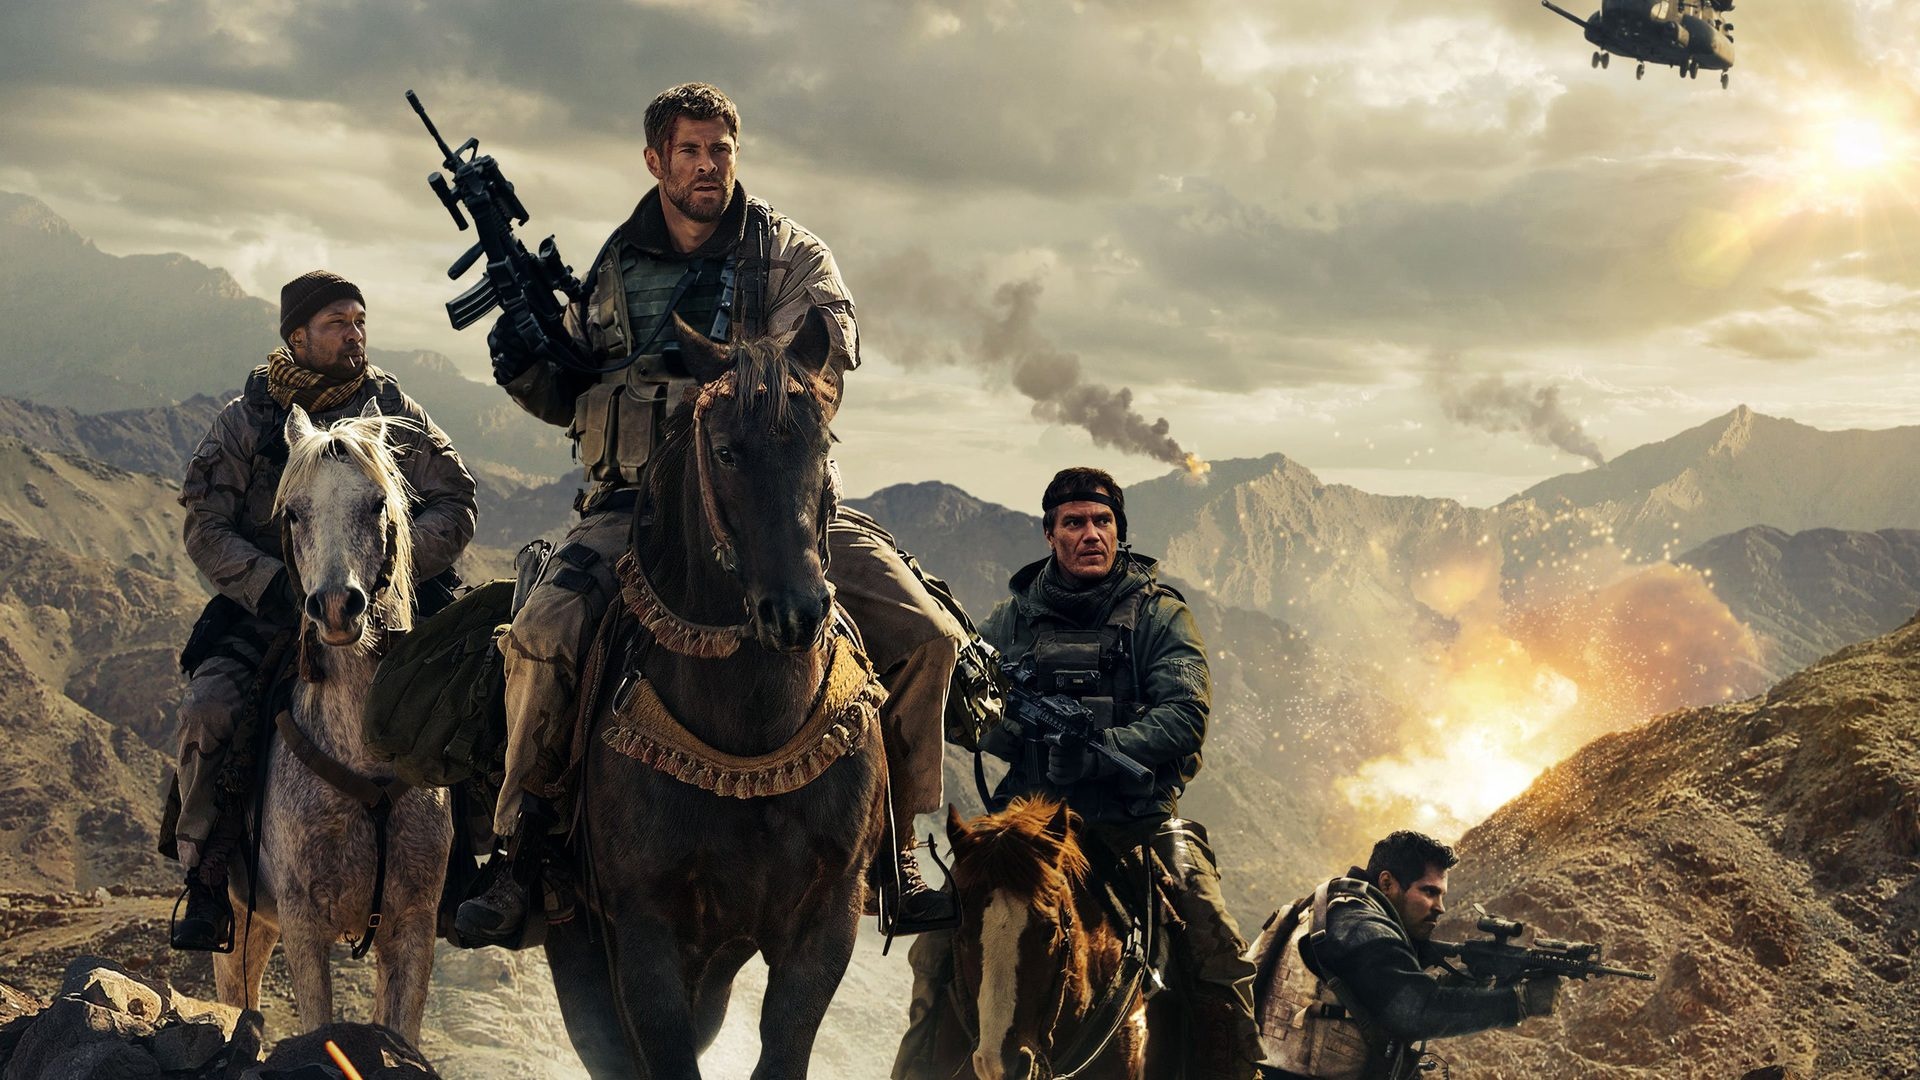 Michael Shannon: 12 Strong, Horse Soldiers, 2018 American action-war film, Directed by Nicolai Fuglsig, Written by Ted Tally and Peter Craig. 1920x1080 Full HD Background.